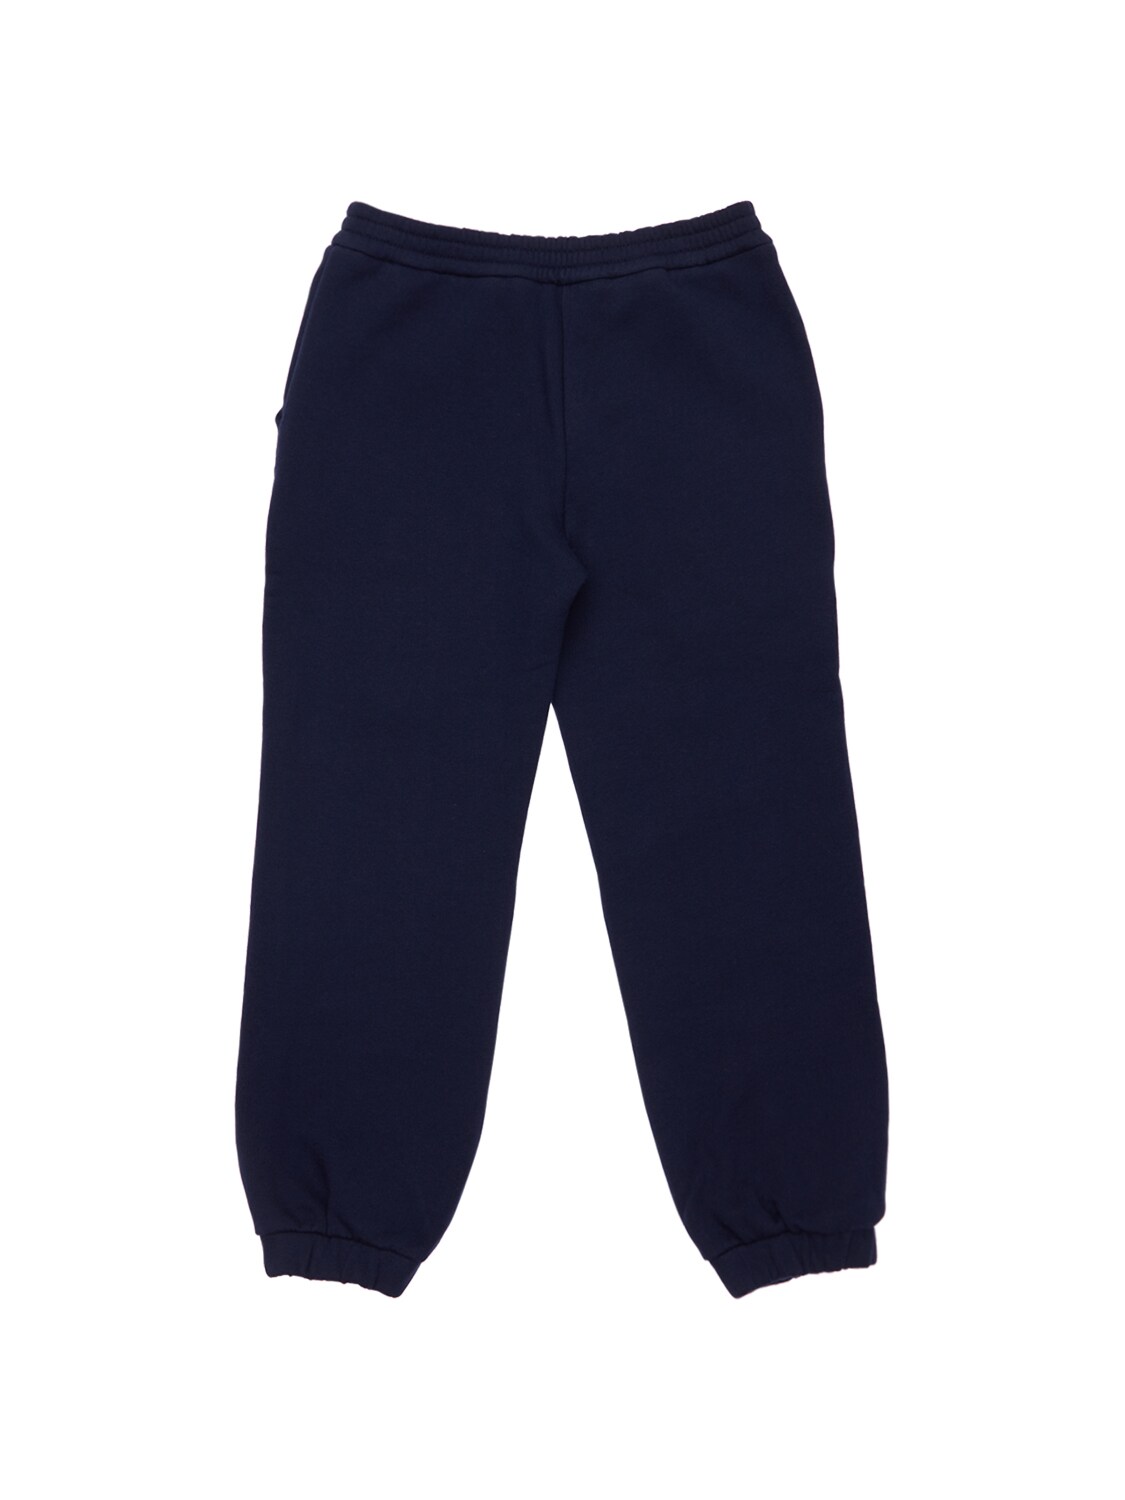 Shop Gucci Cotton Pants In Navy